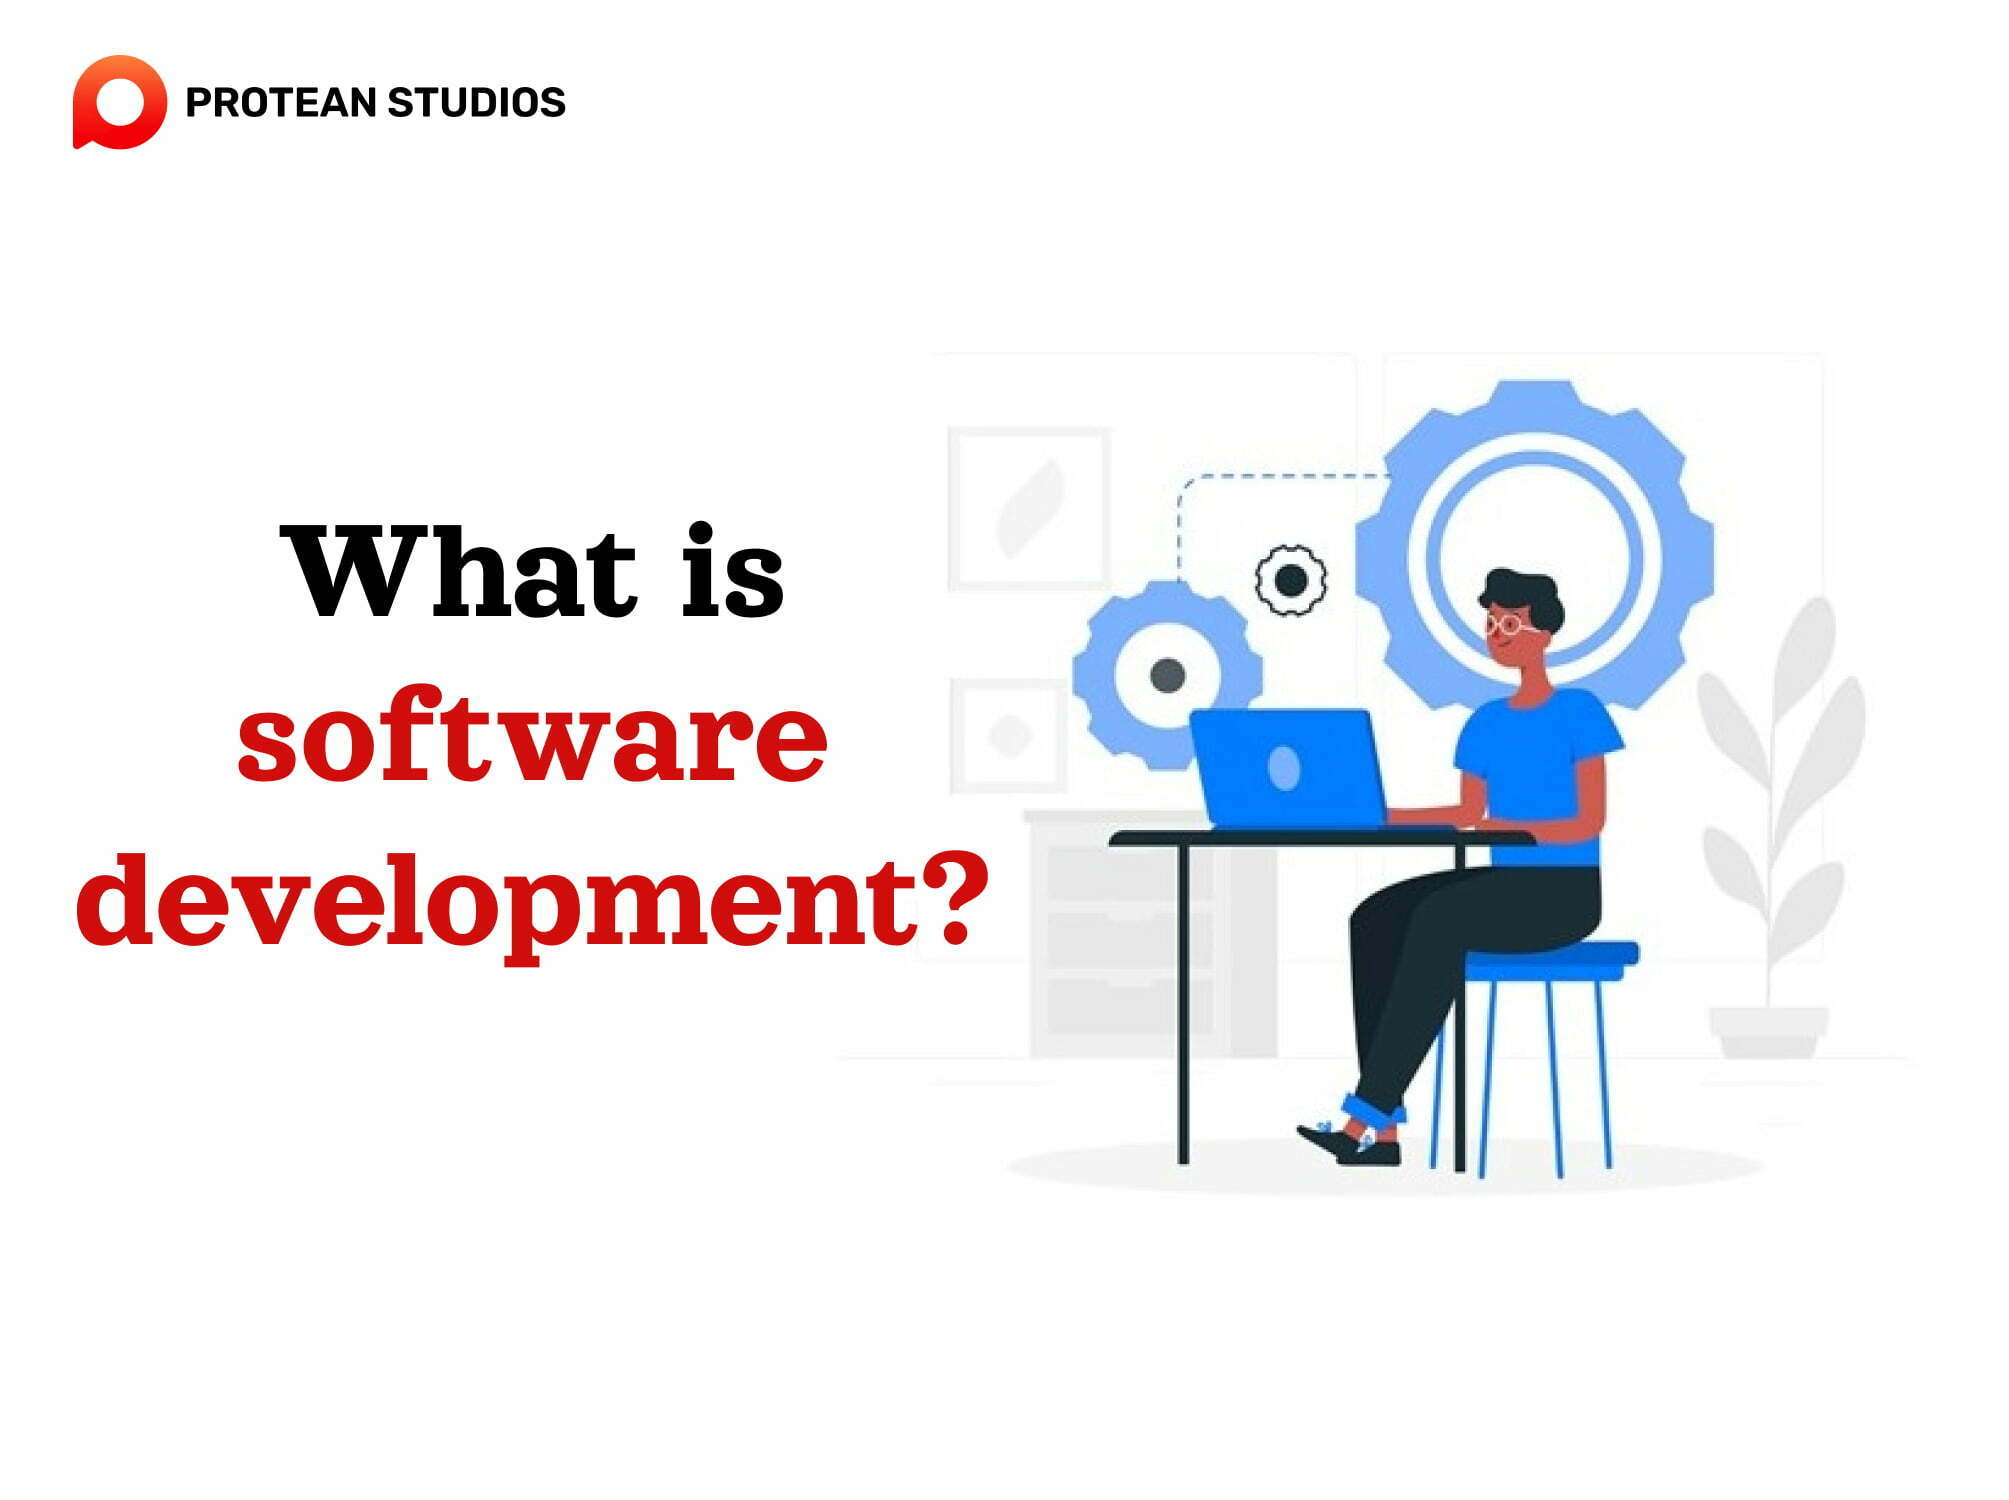 Some basic information about software development